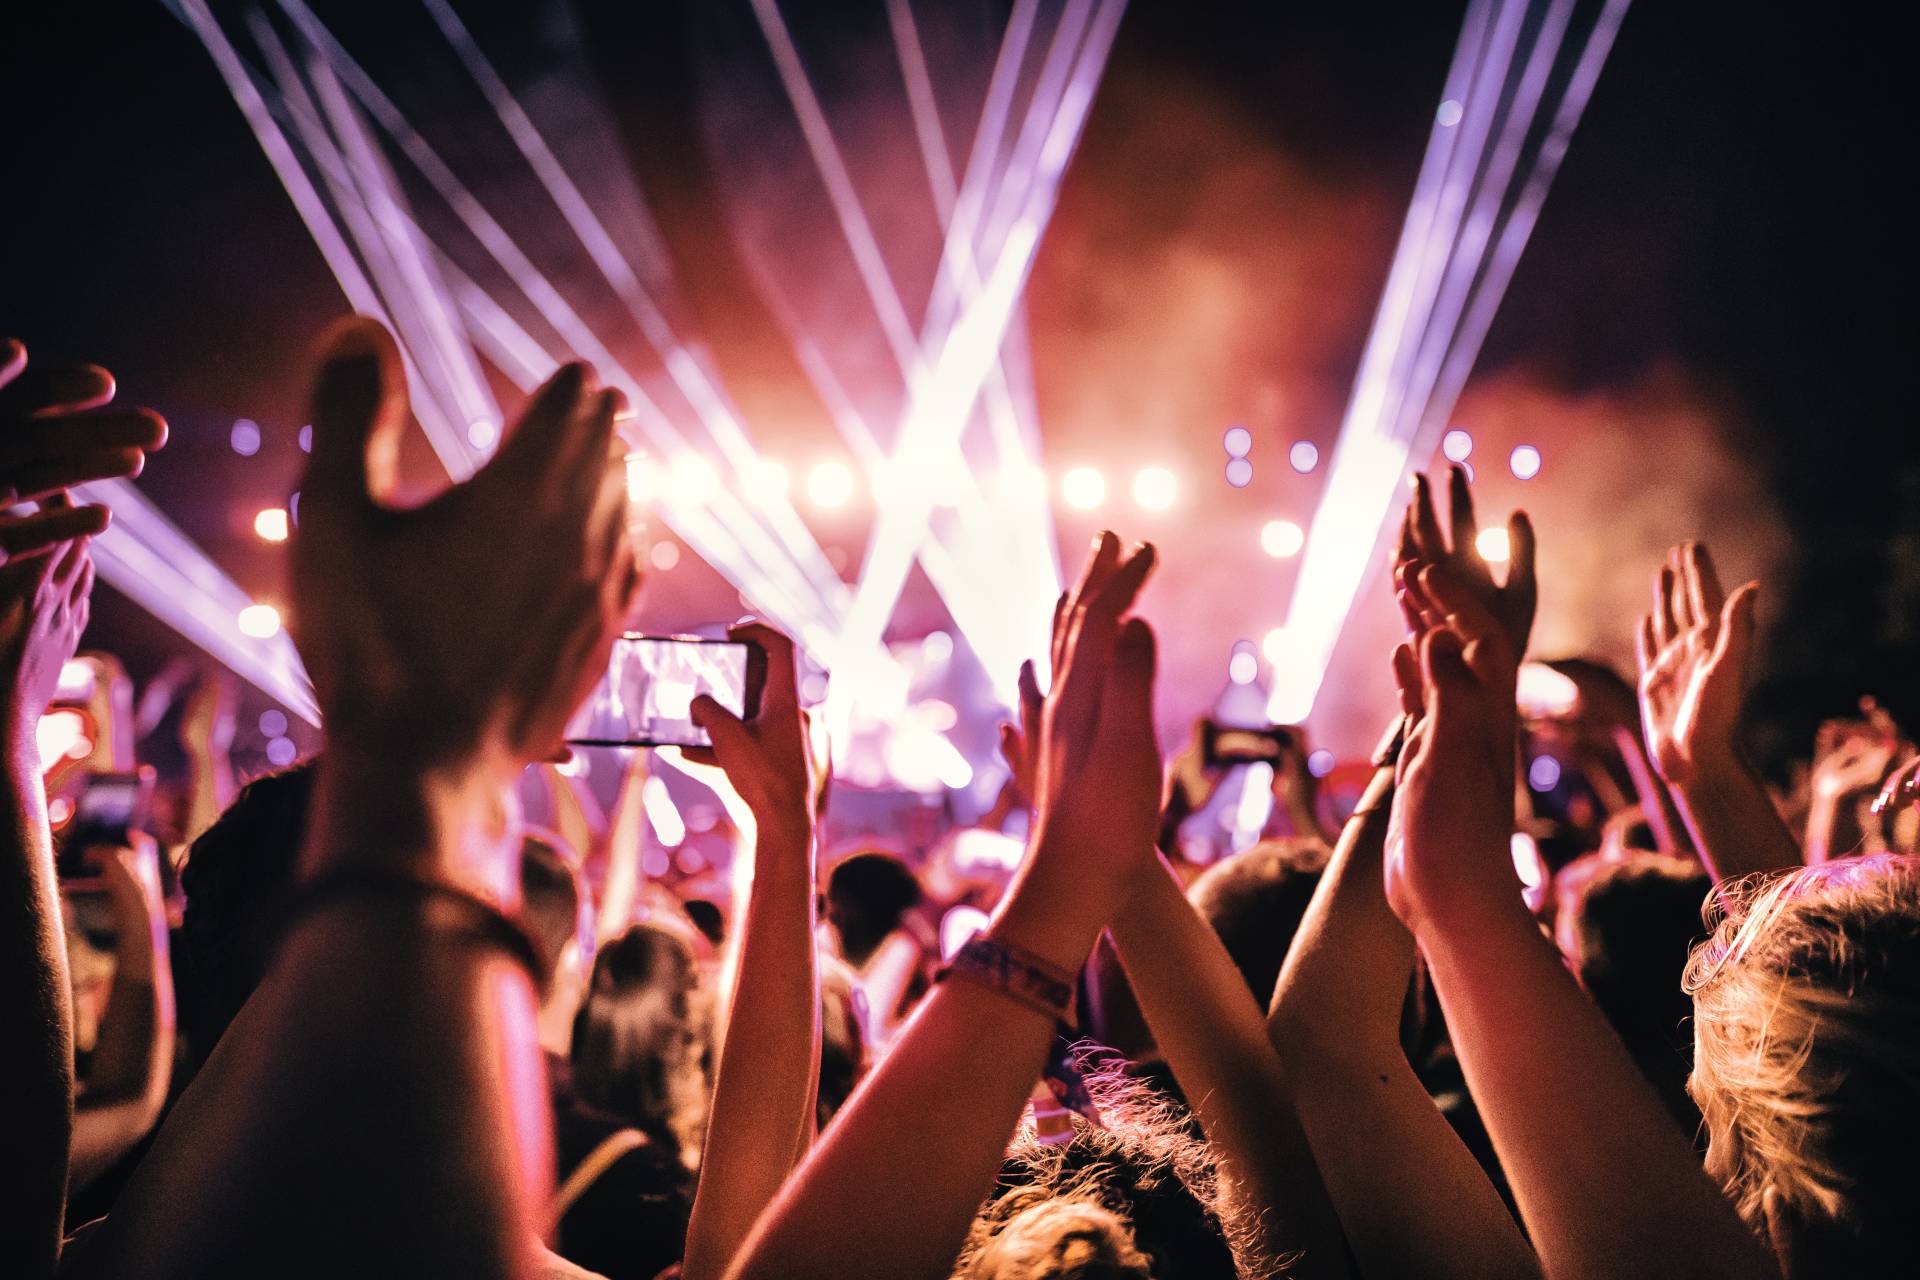 Hands in a crowd at a music show